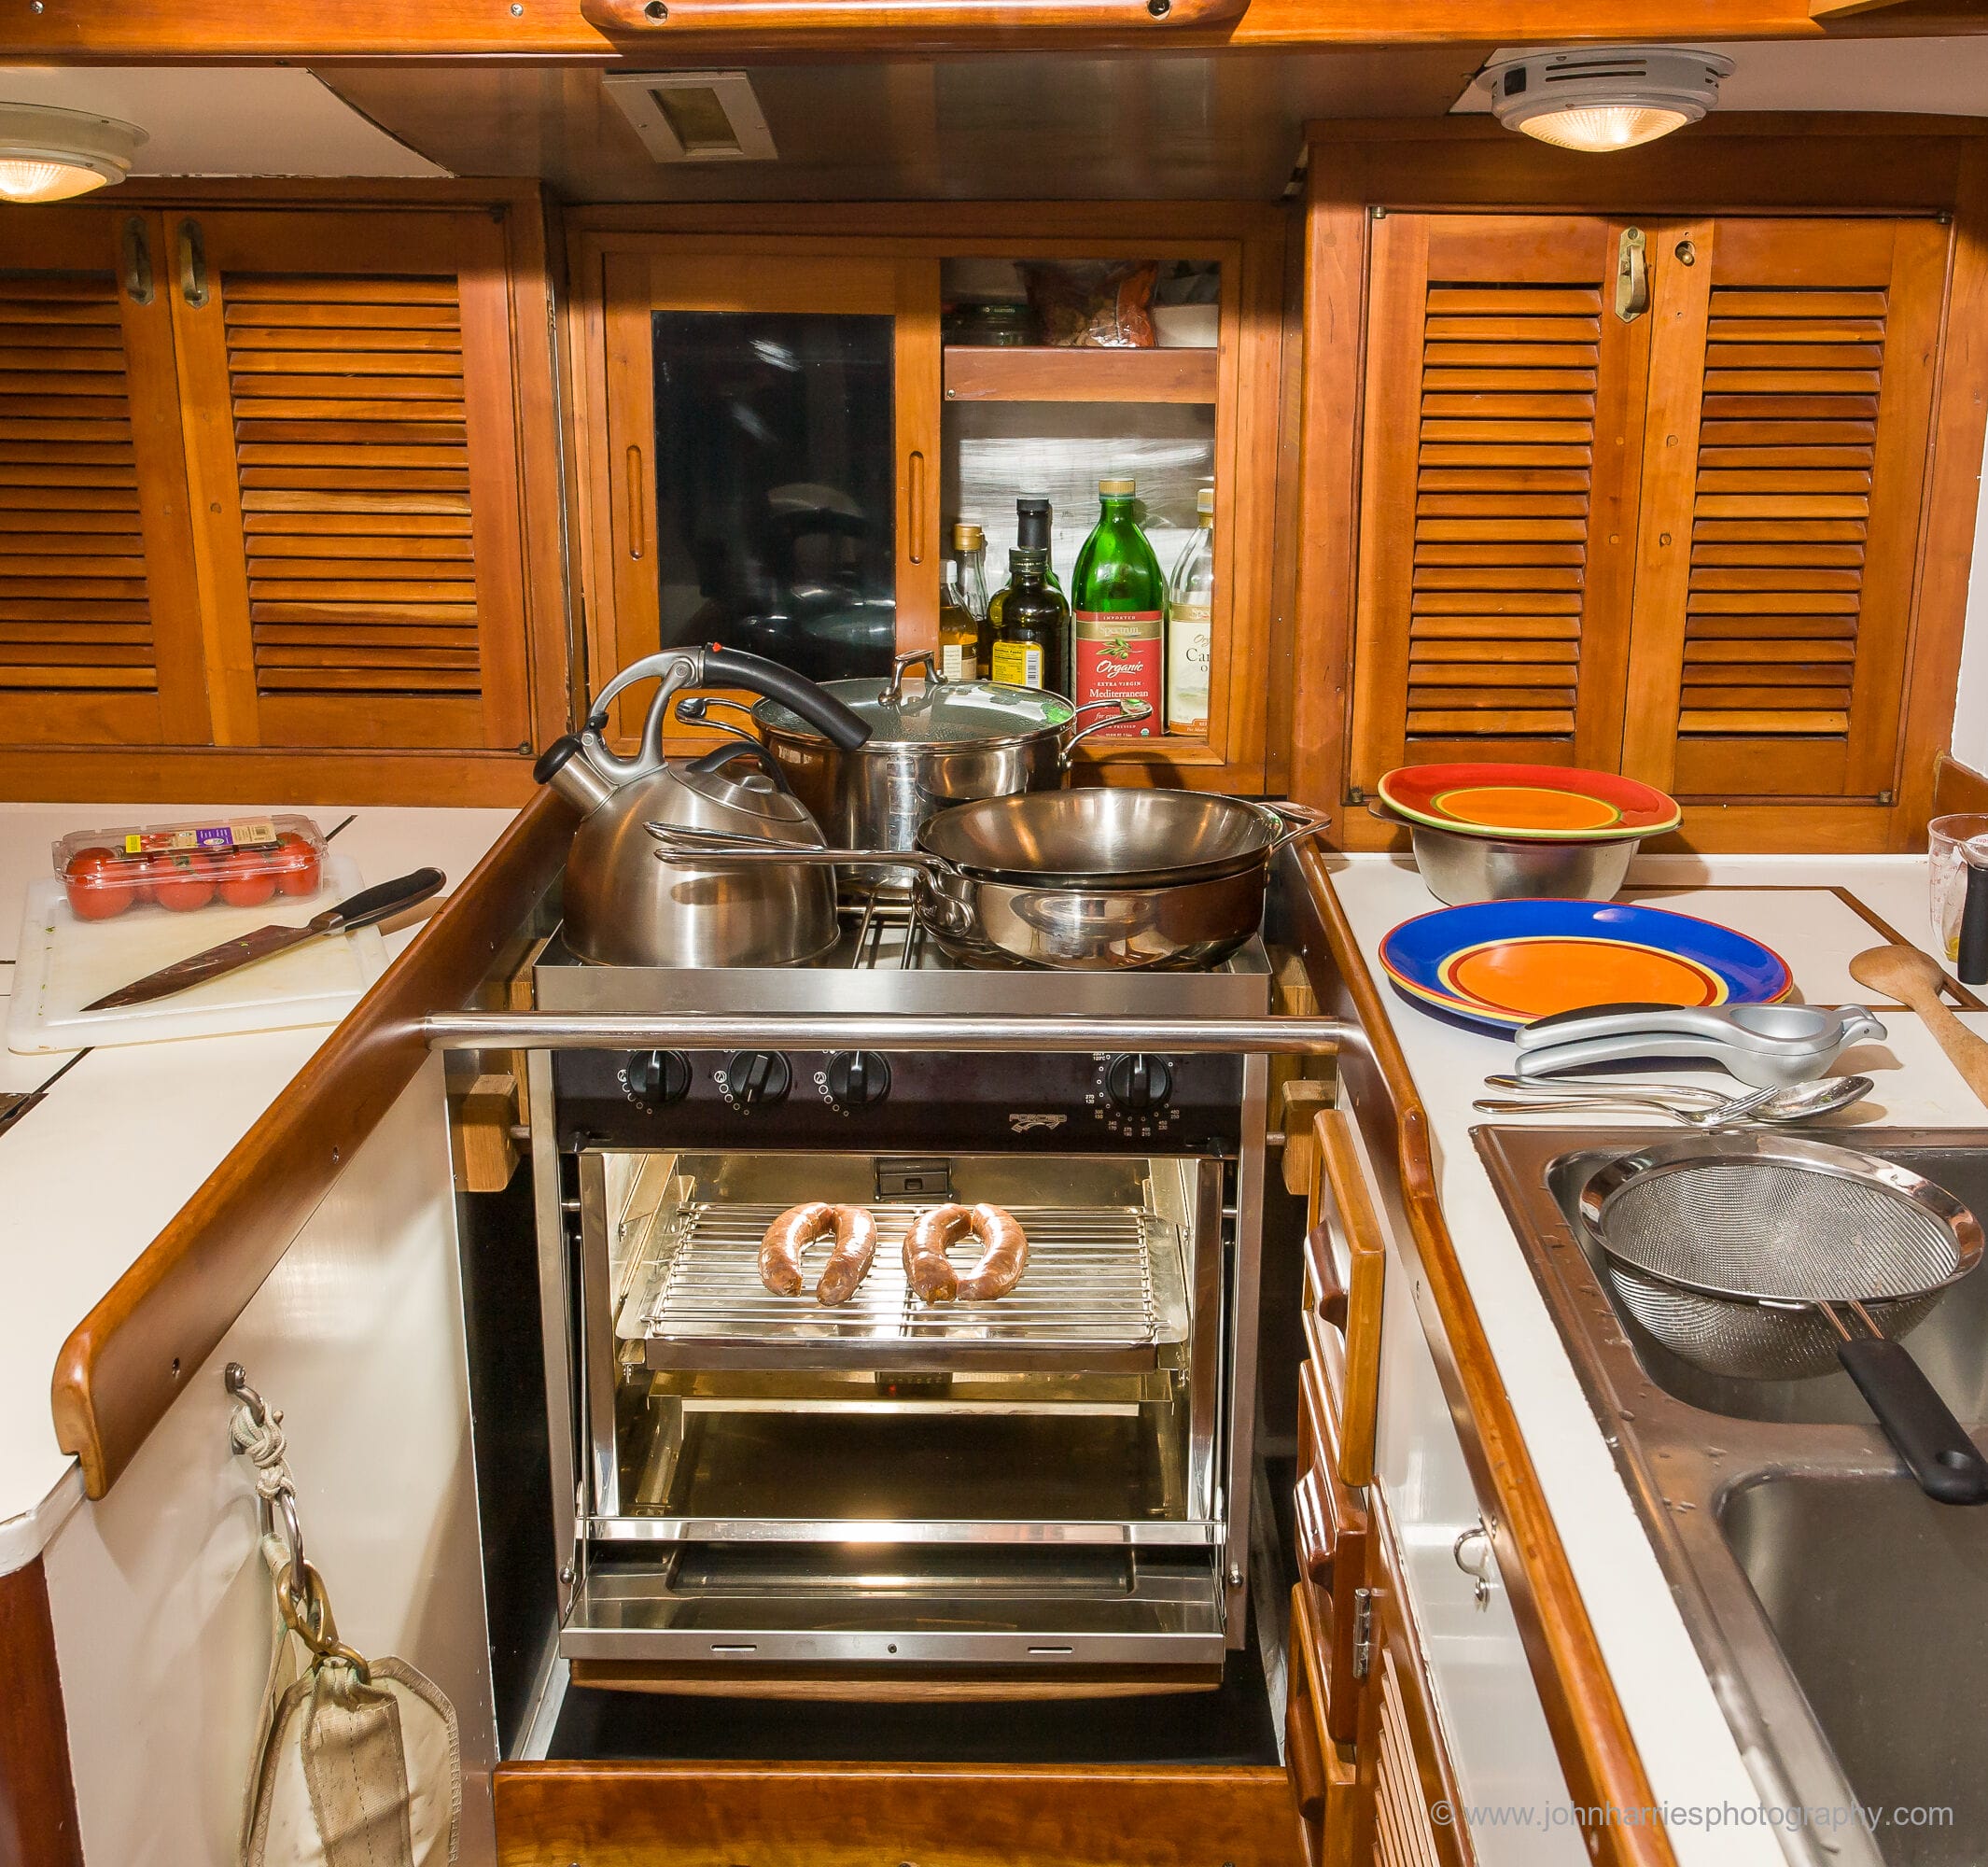 Is Induction Cooking For Boats Practical? - Attainable Adventure Cruising